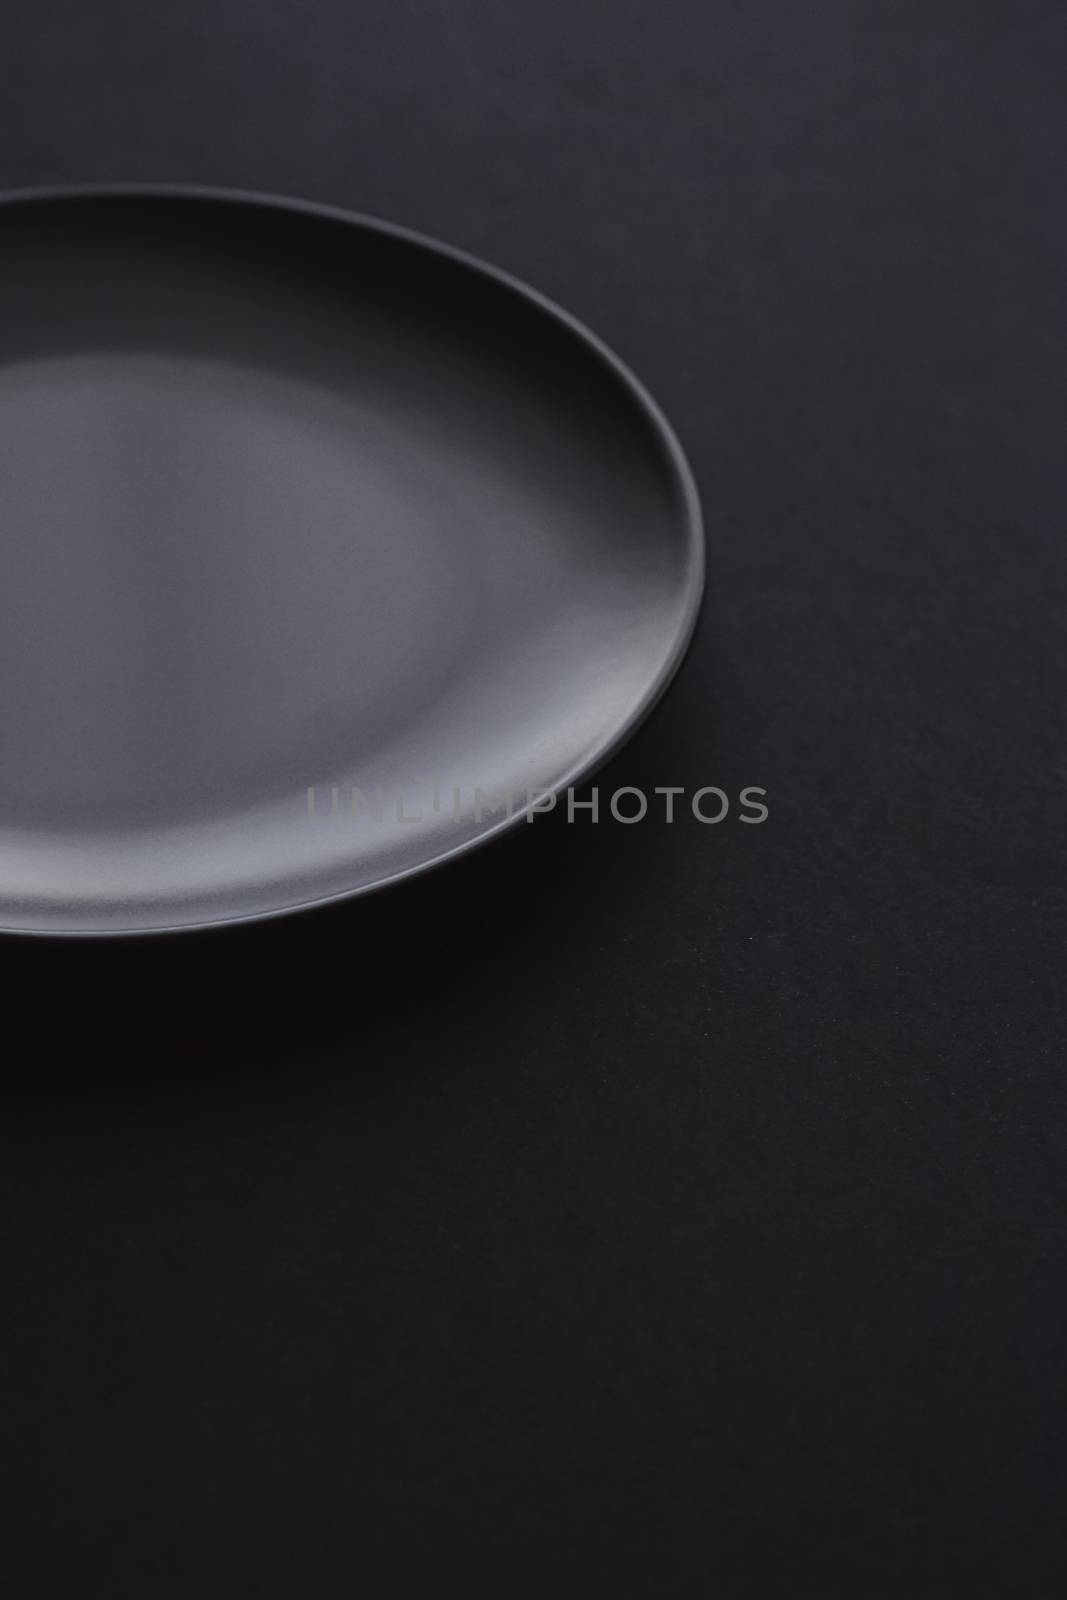 Empty plates on black background, premium dishware for holiday dinner, minimalistic design and diet by Anneleven